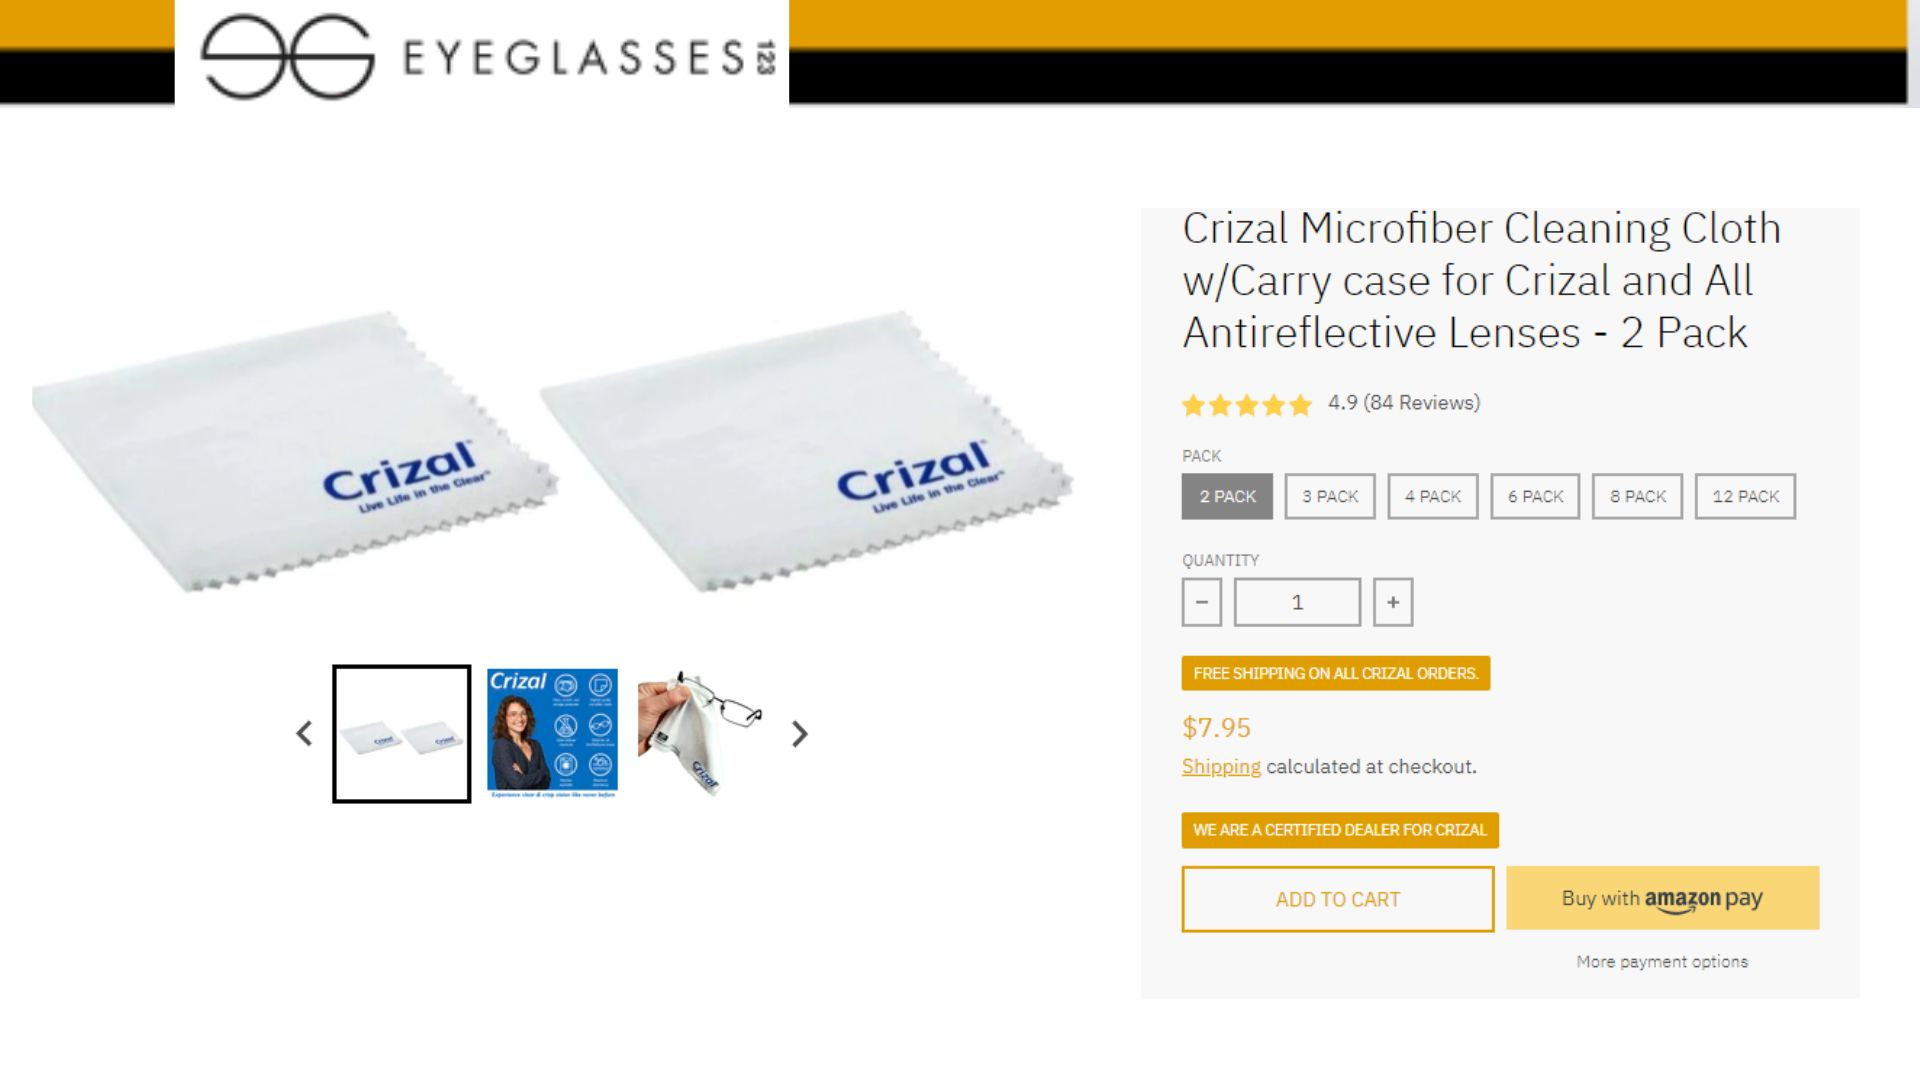 What is the Best Store to Purchase Crizal Eyeglasses Cleaner Set